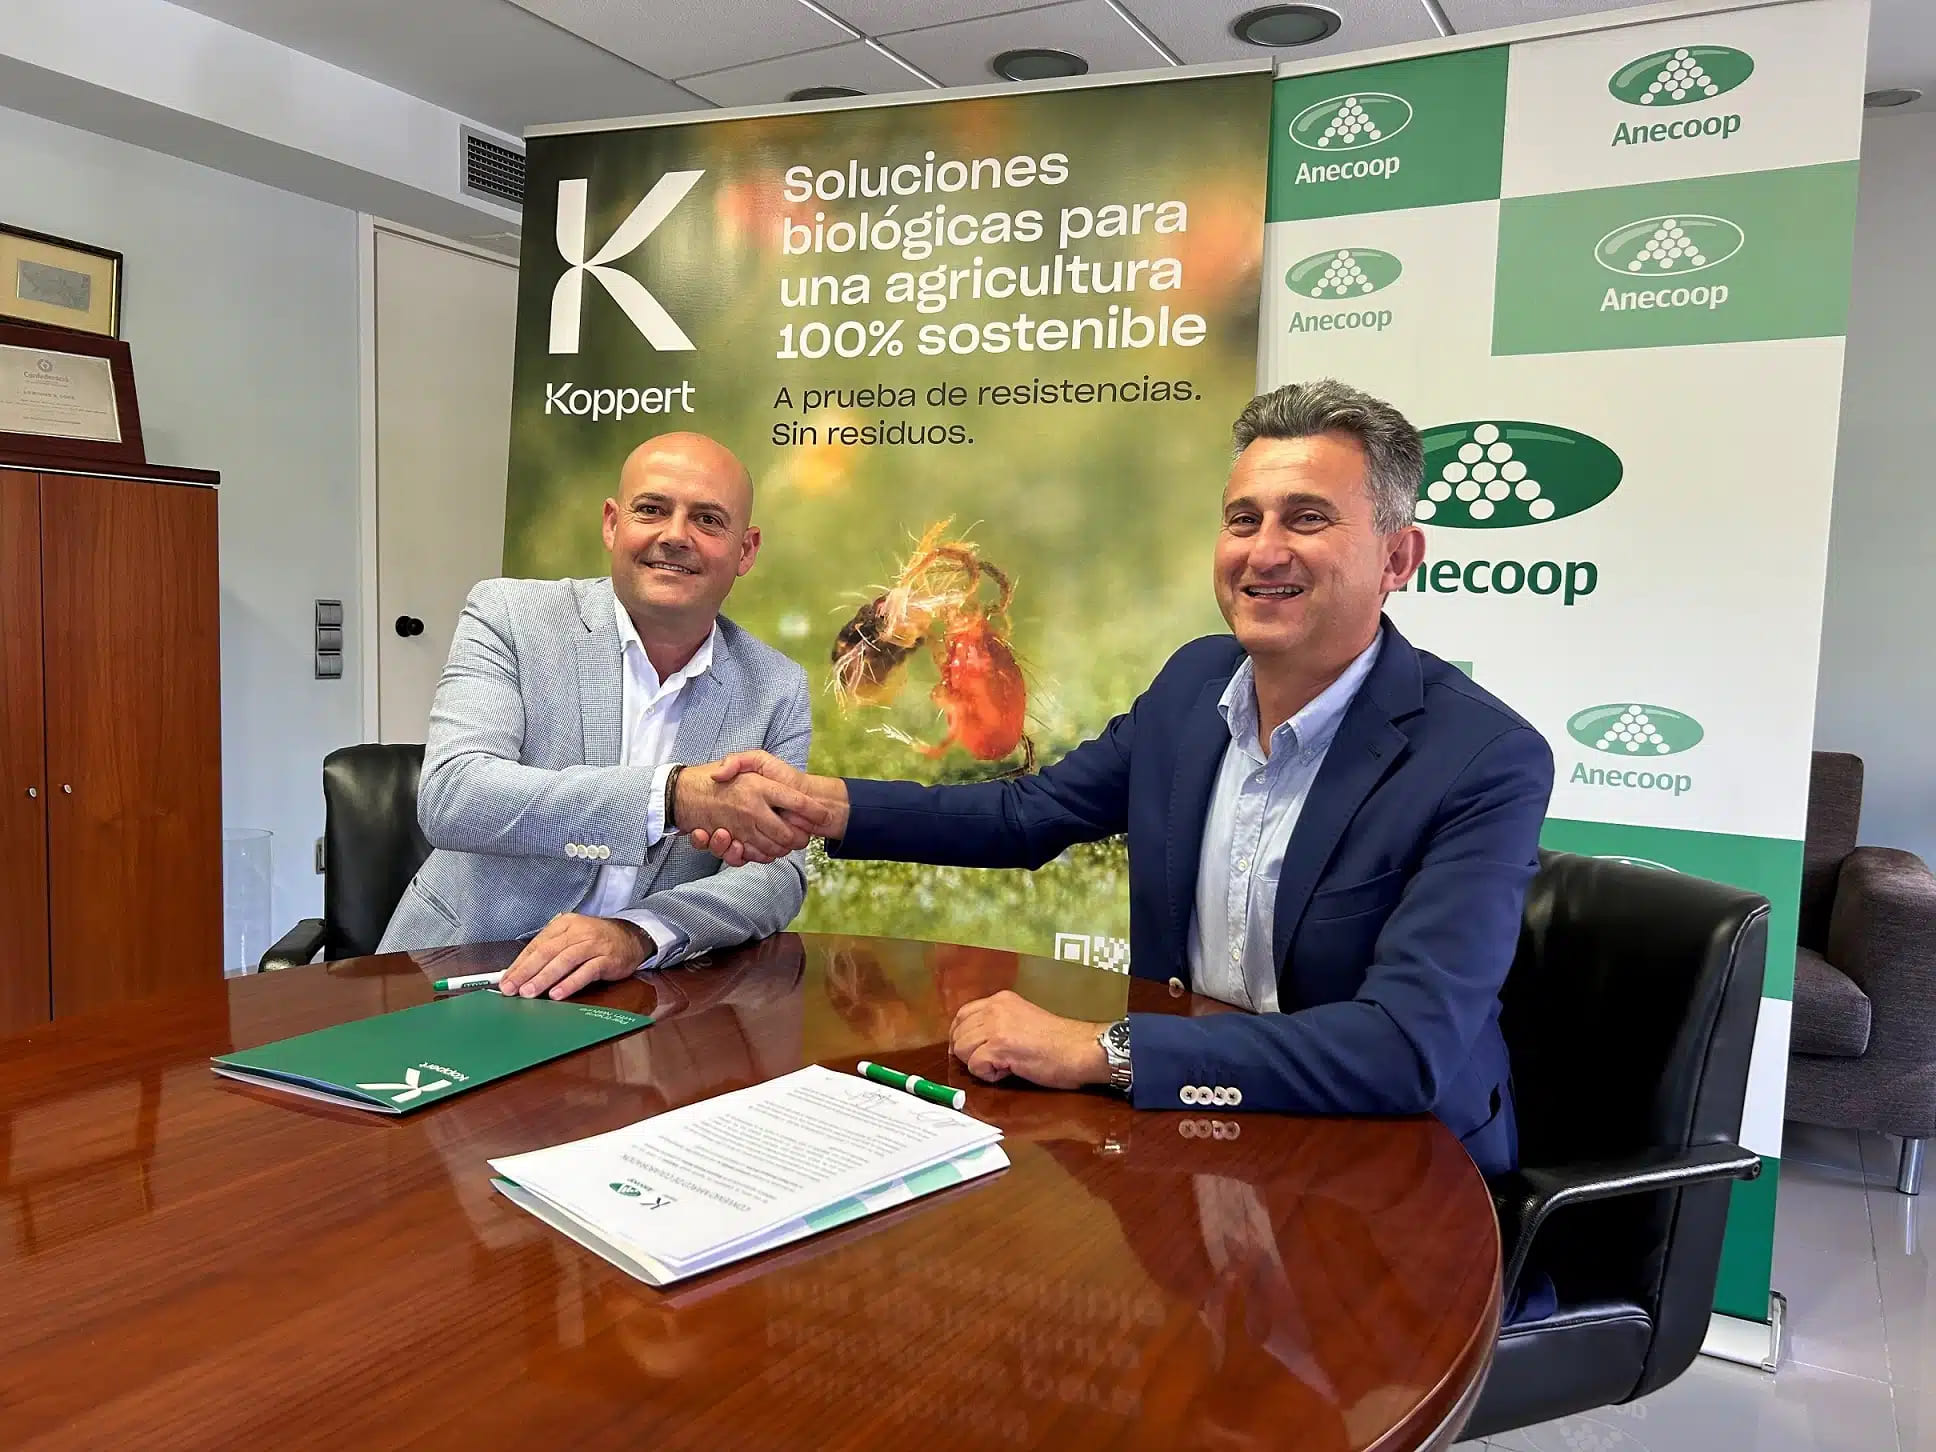 Anecoop teams up with Koppert to implement biological control 